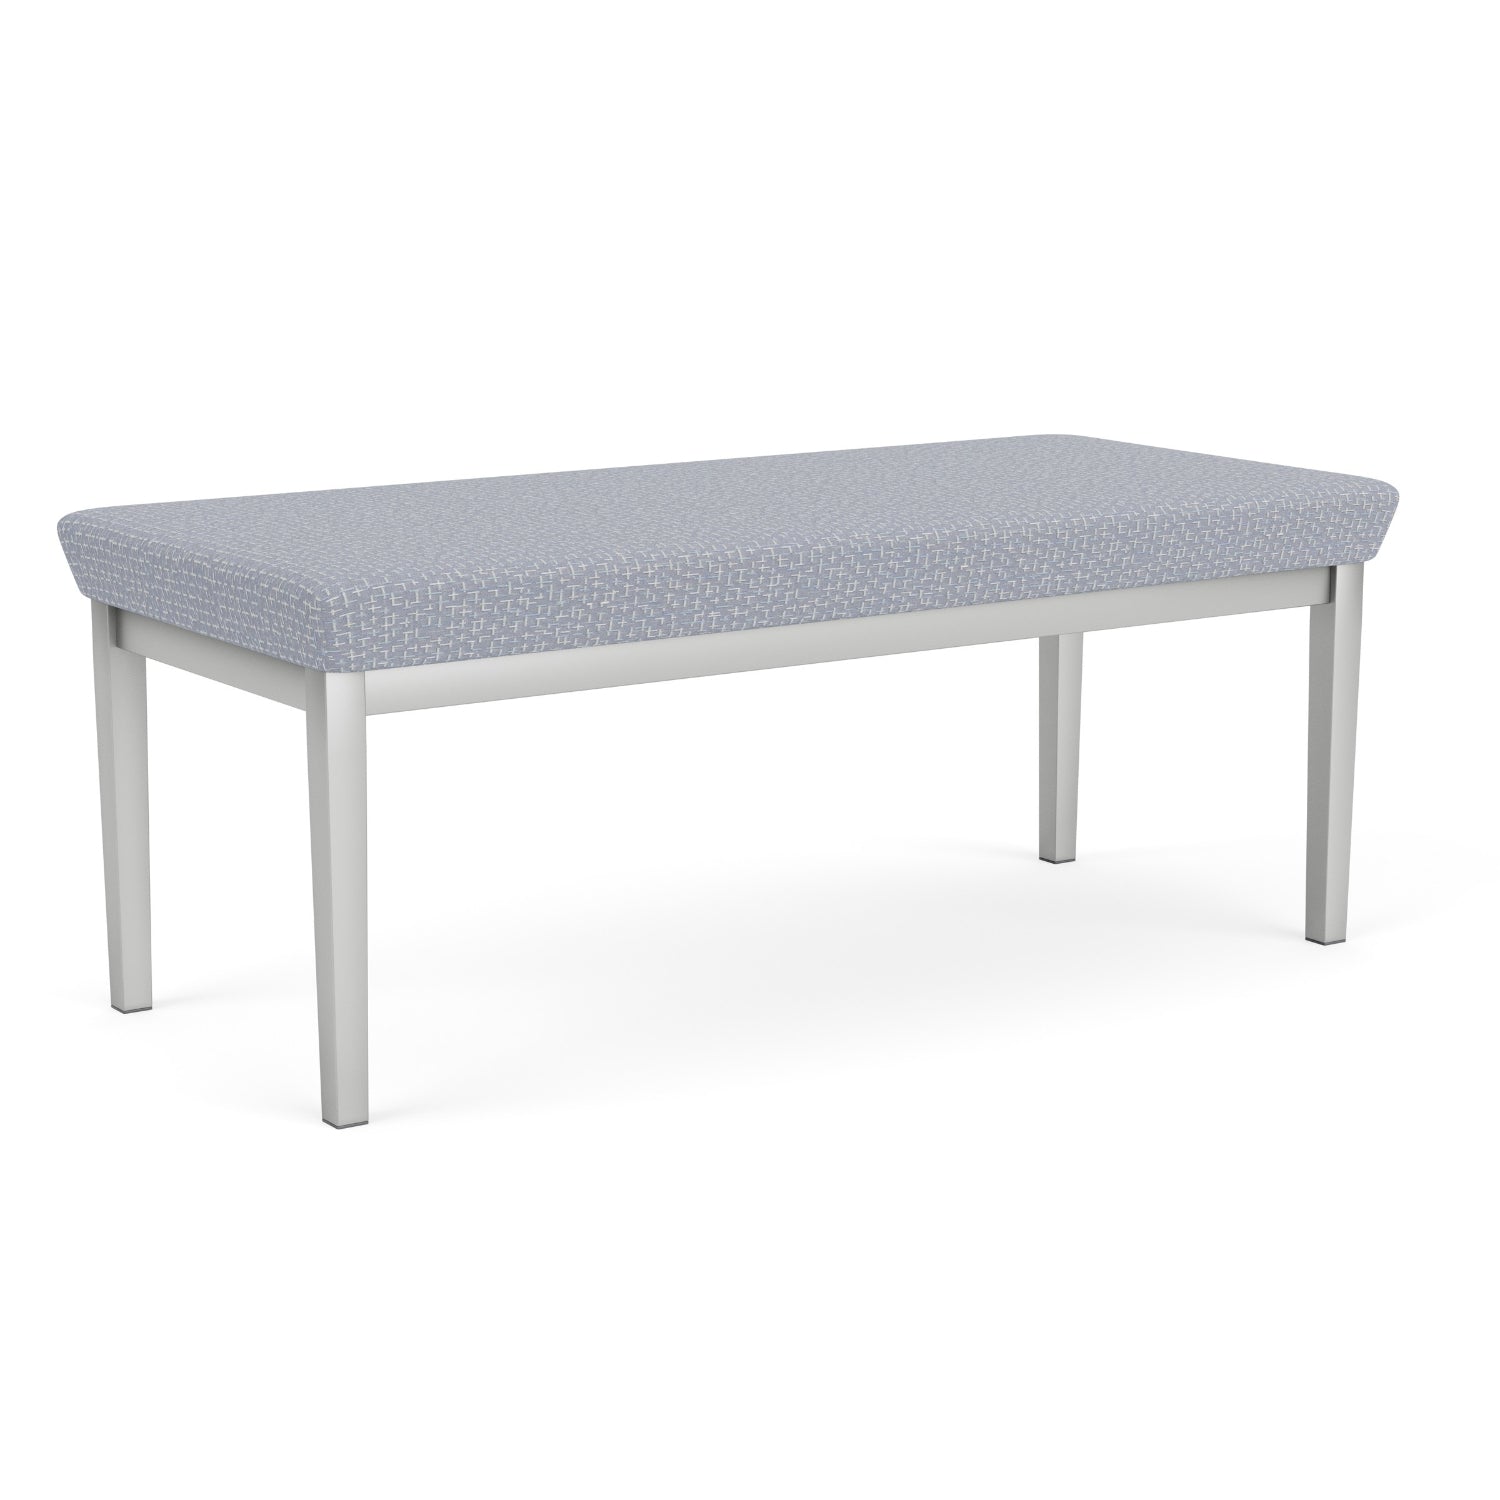 Amherst Steel Collection Reception Seating, 2 Seat Bench, Designer Fabric Upholstery, FREE SHIPPING